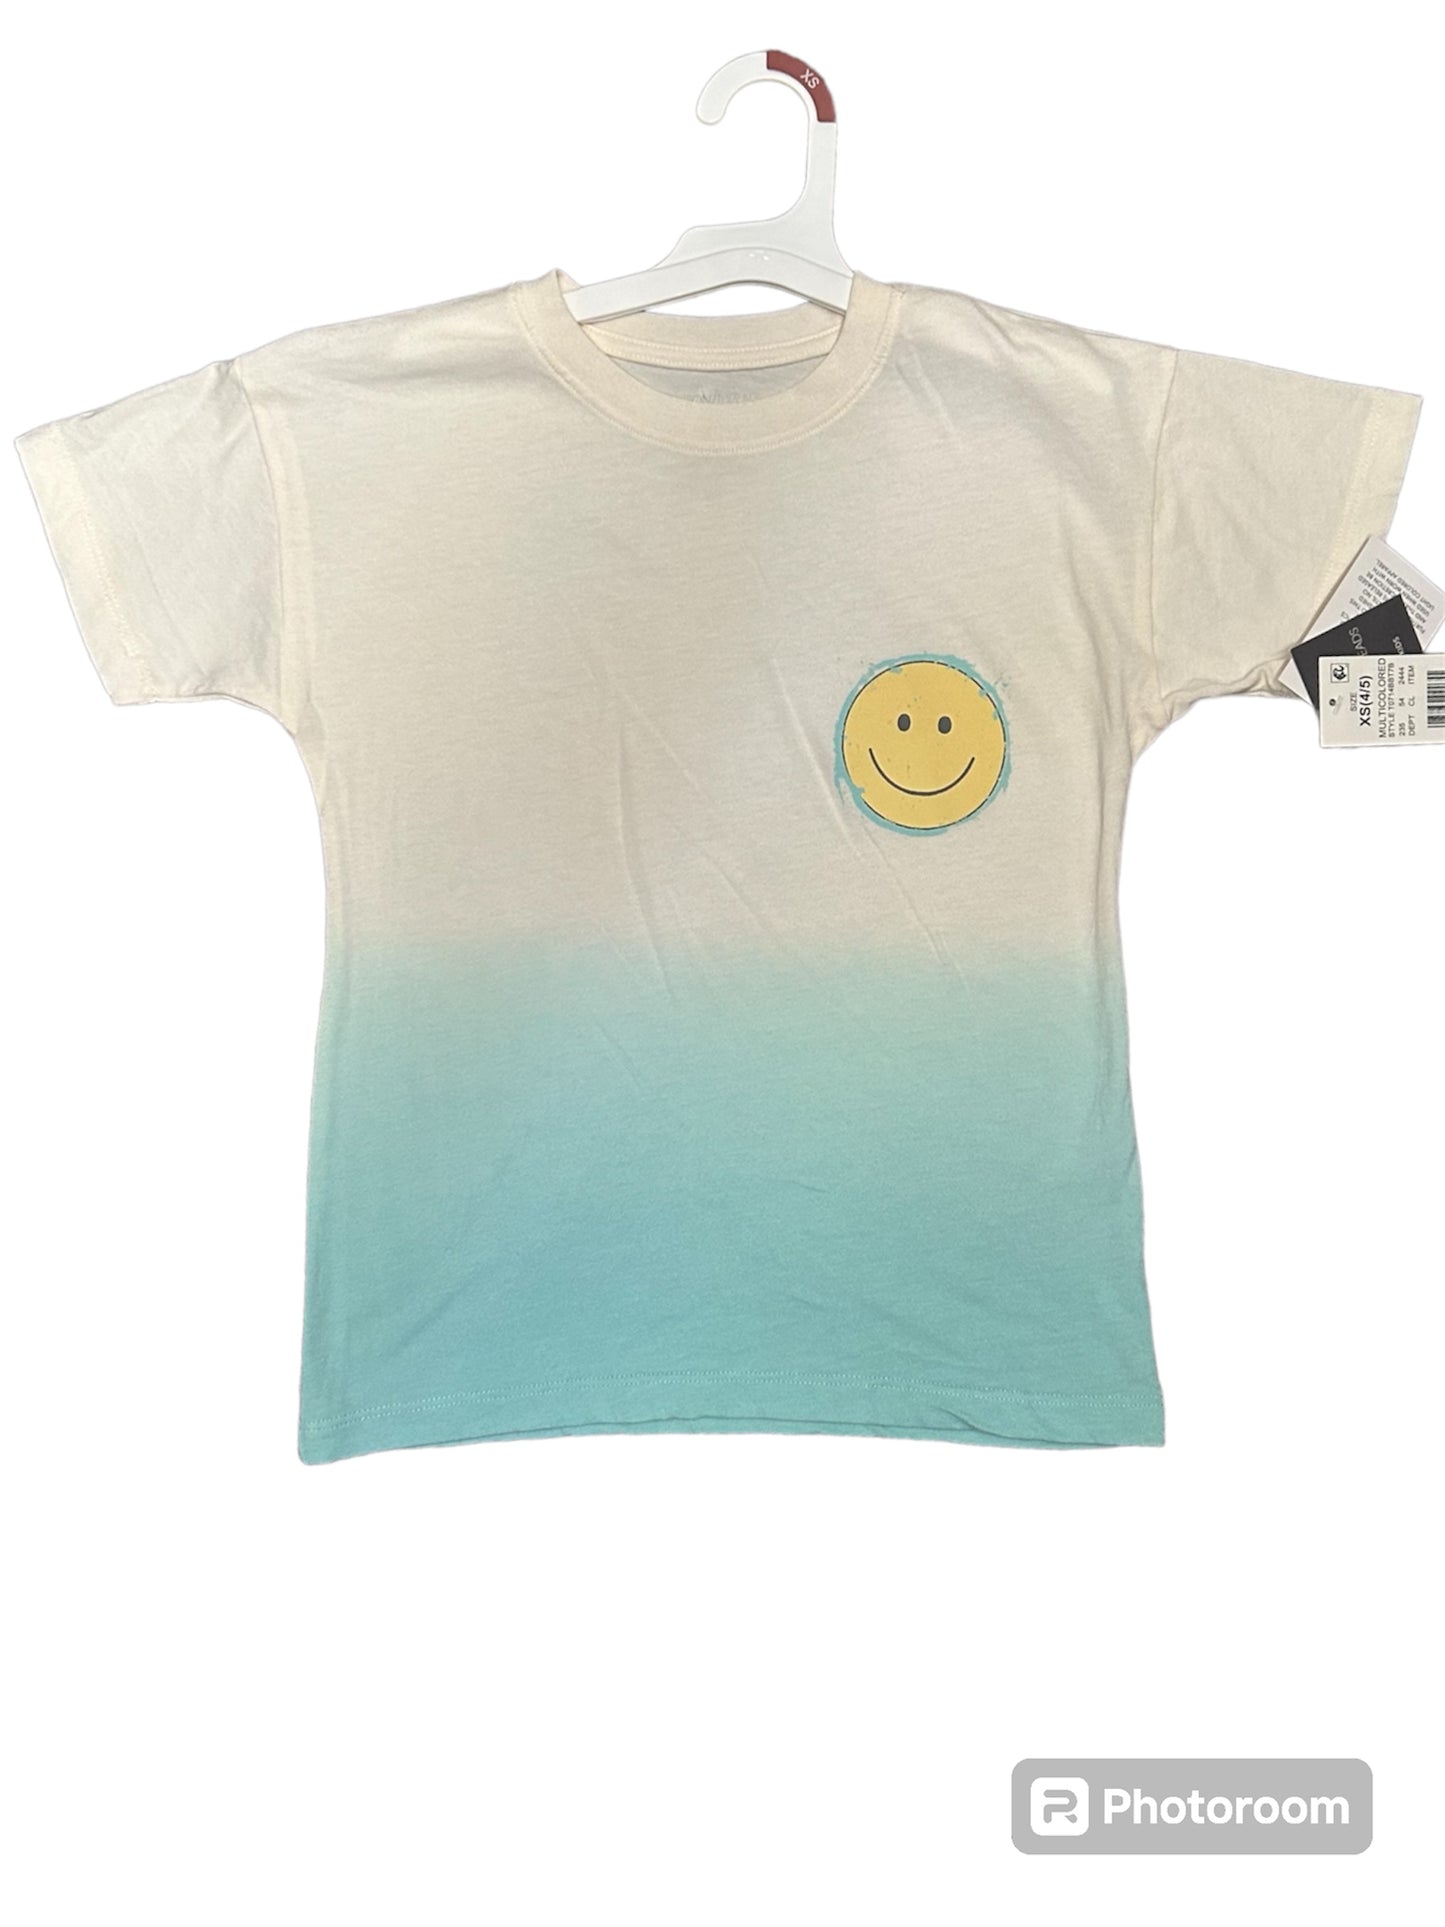 Boys “Smiley Face” Two Toned T-shirt